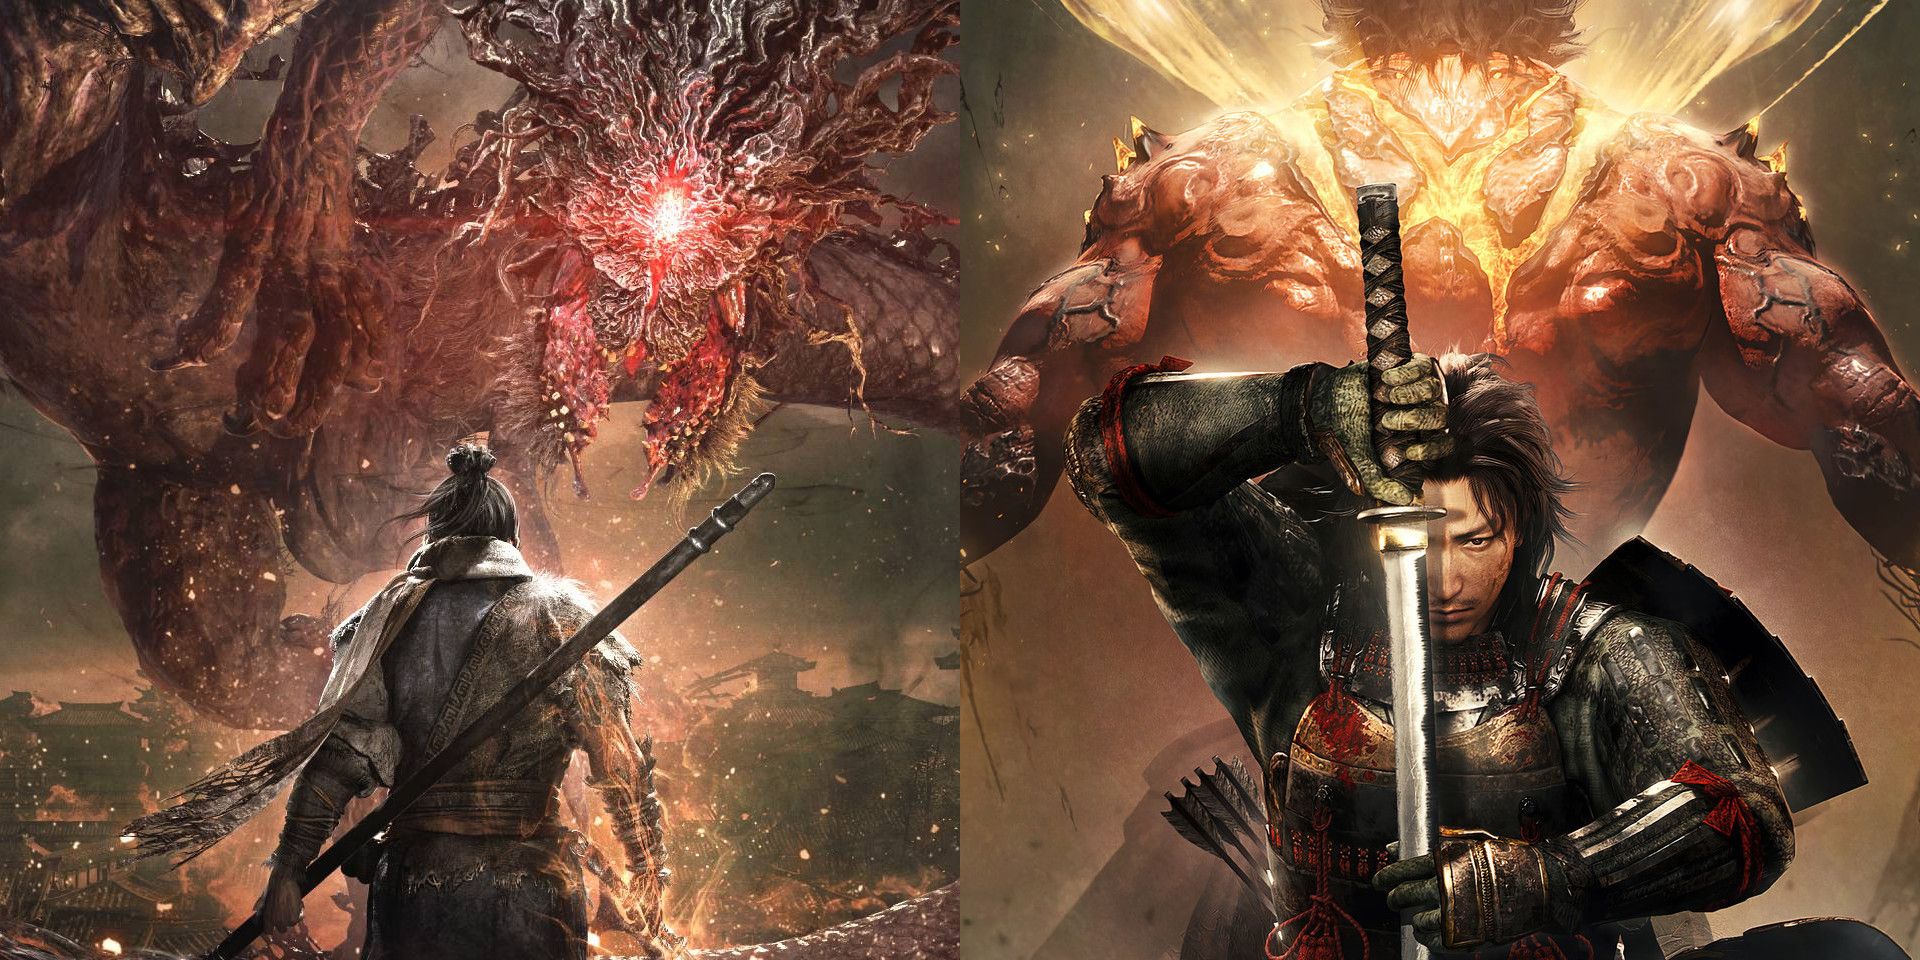 Cover art for Wo Long: Fallen Dynasty on the left, depicting a man with a weapon facing away from the camera against a dragon, and Nioh 2 on the right, depicting a man facing the camera and drawing a katana, back-to-back with a muscled demon.